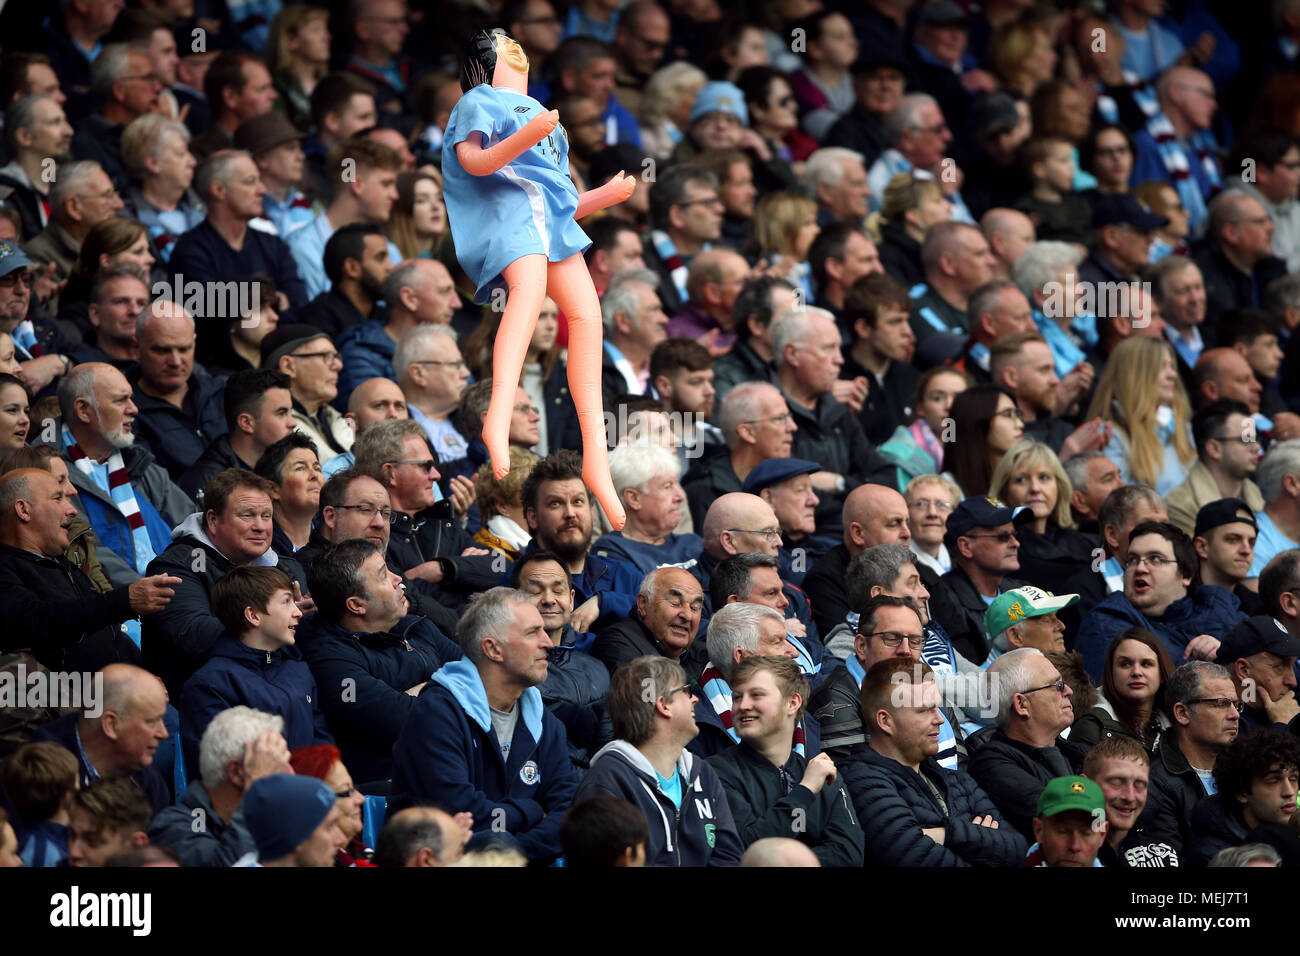 Manchester City fans hold up an inflatable doll in the stands during the Premier League match at the Etihad Stadium, Manchester. Stock Photo